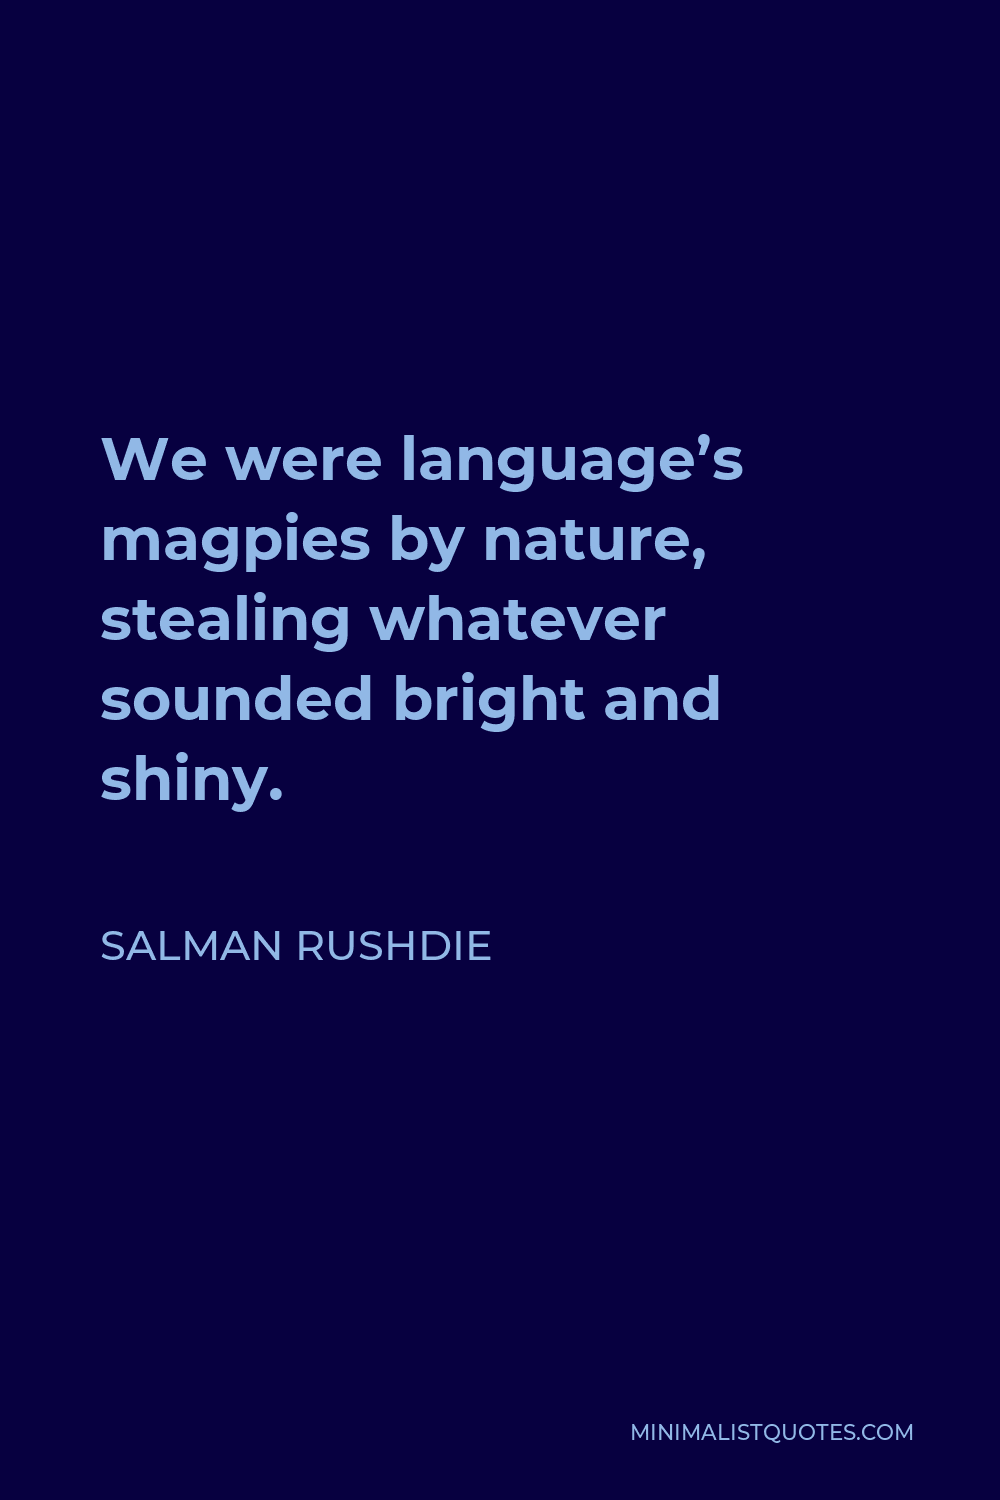 Salman Rushdie Quote - We were language’s magpies by nature, stealing whatever sounded bright and shiny.